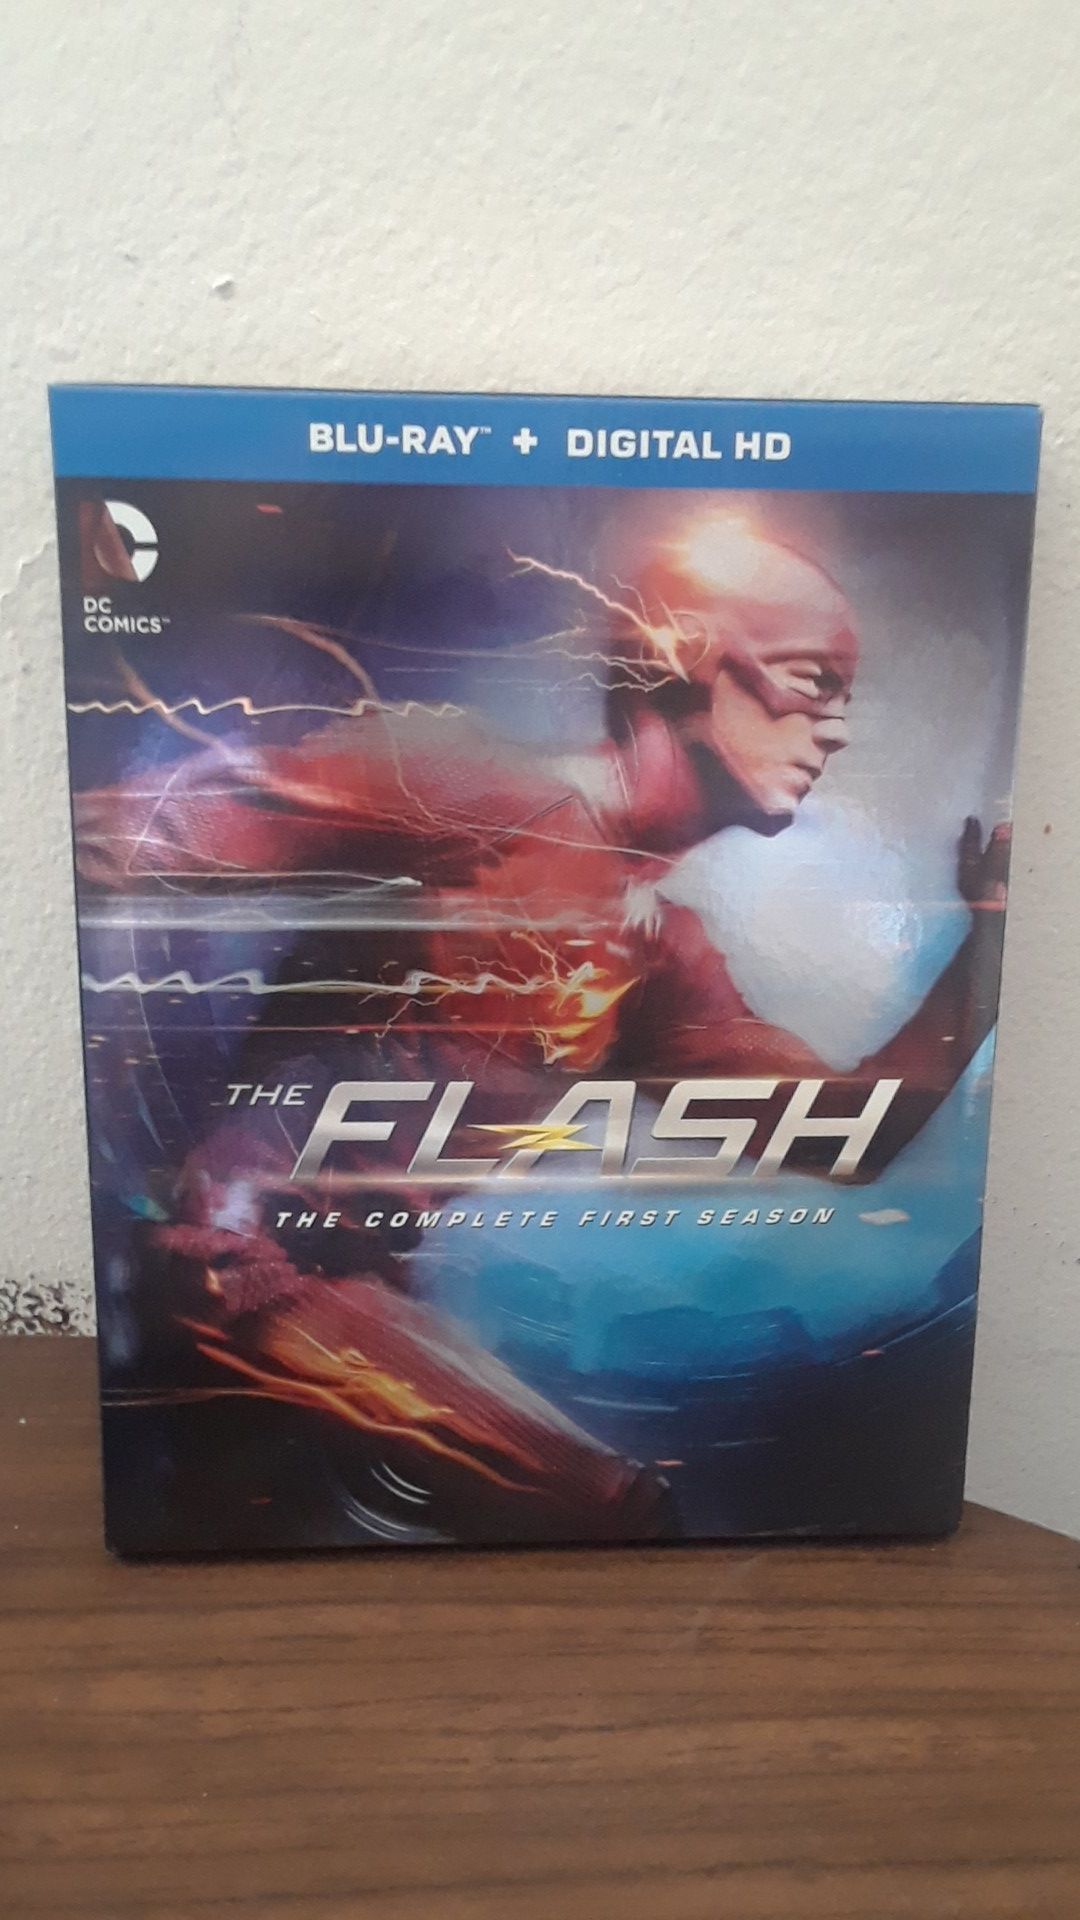 The Flash first season complete blu ray